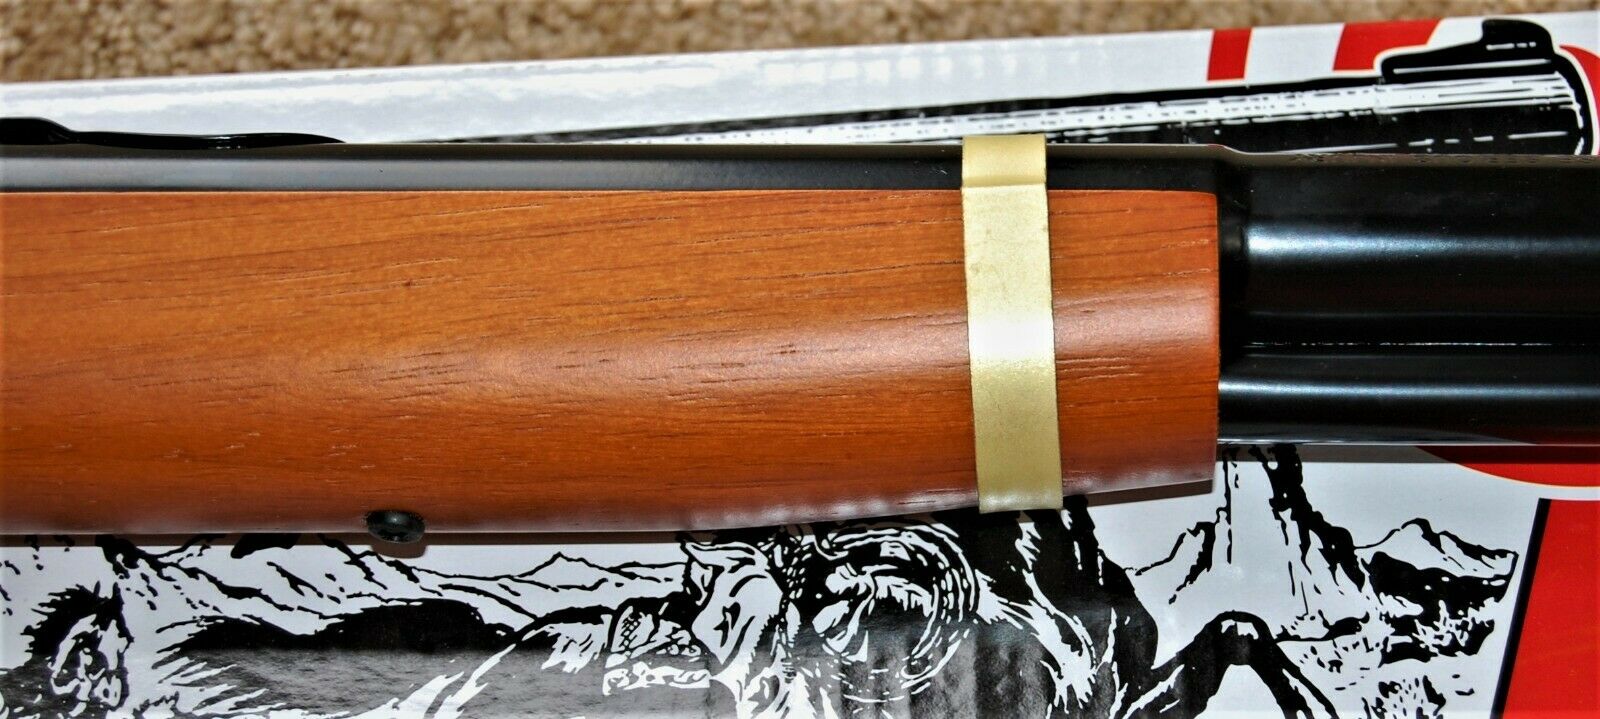 Daisy Red Ryder BB Gun With Scope, RR 80TH Anniv Bronze Medal,  BB'S & Targets.